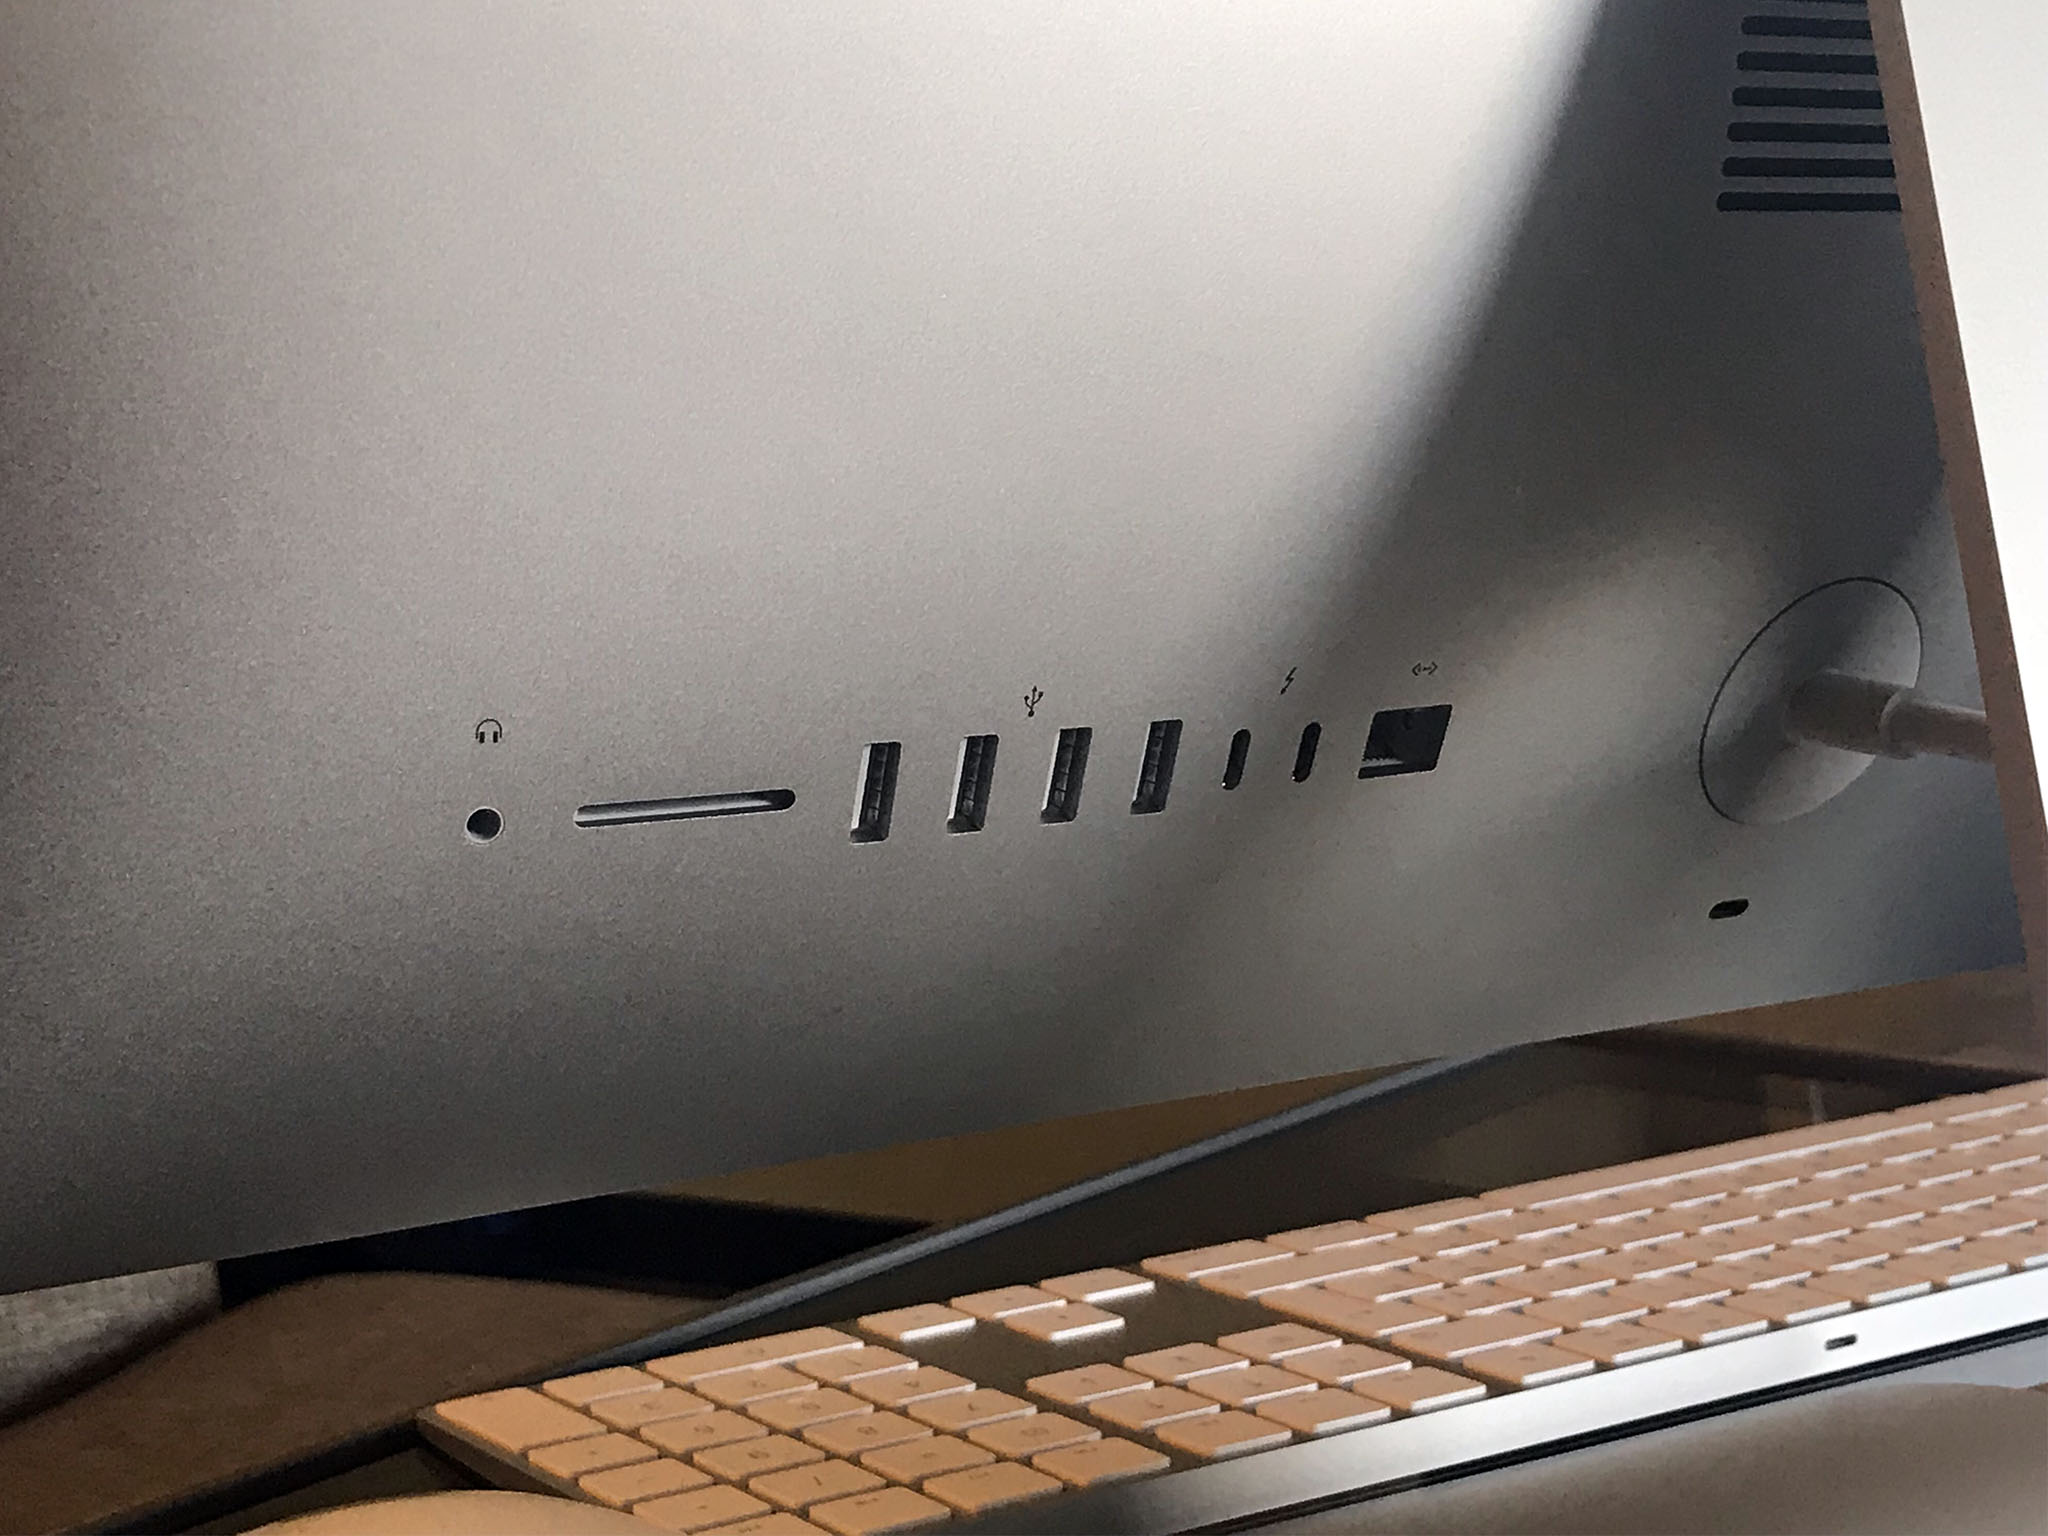 Can you upgrade the RAM in the 27-inch iMac? |